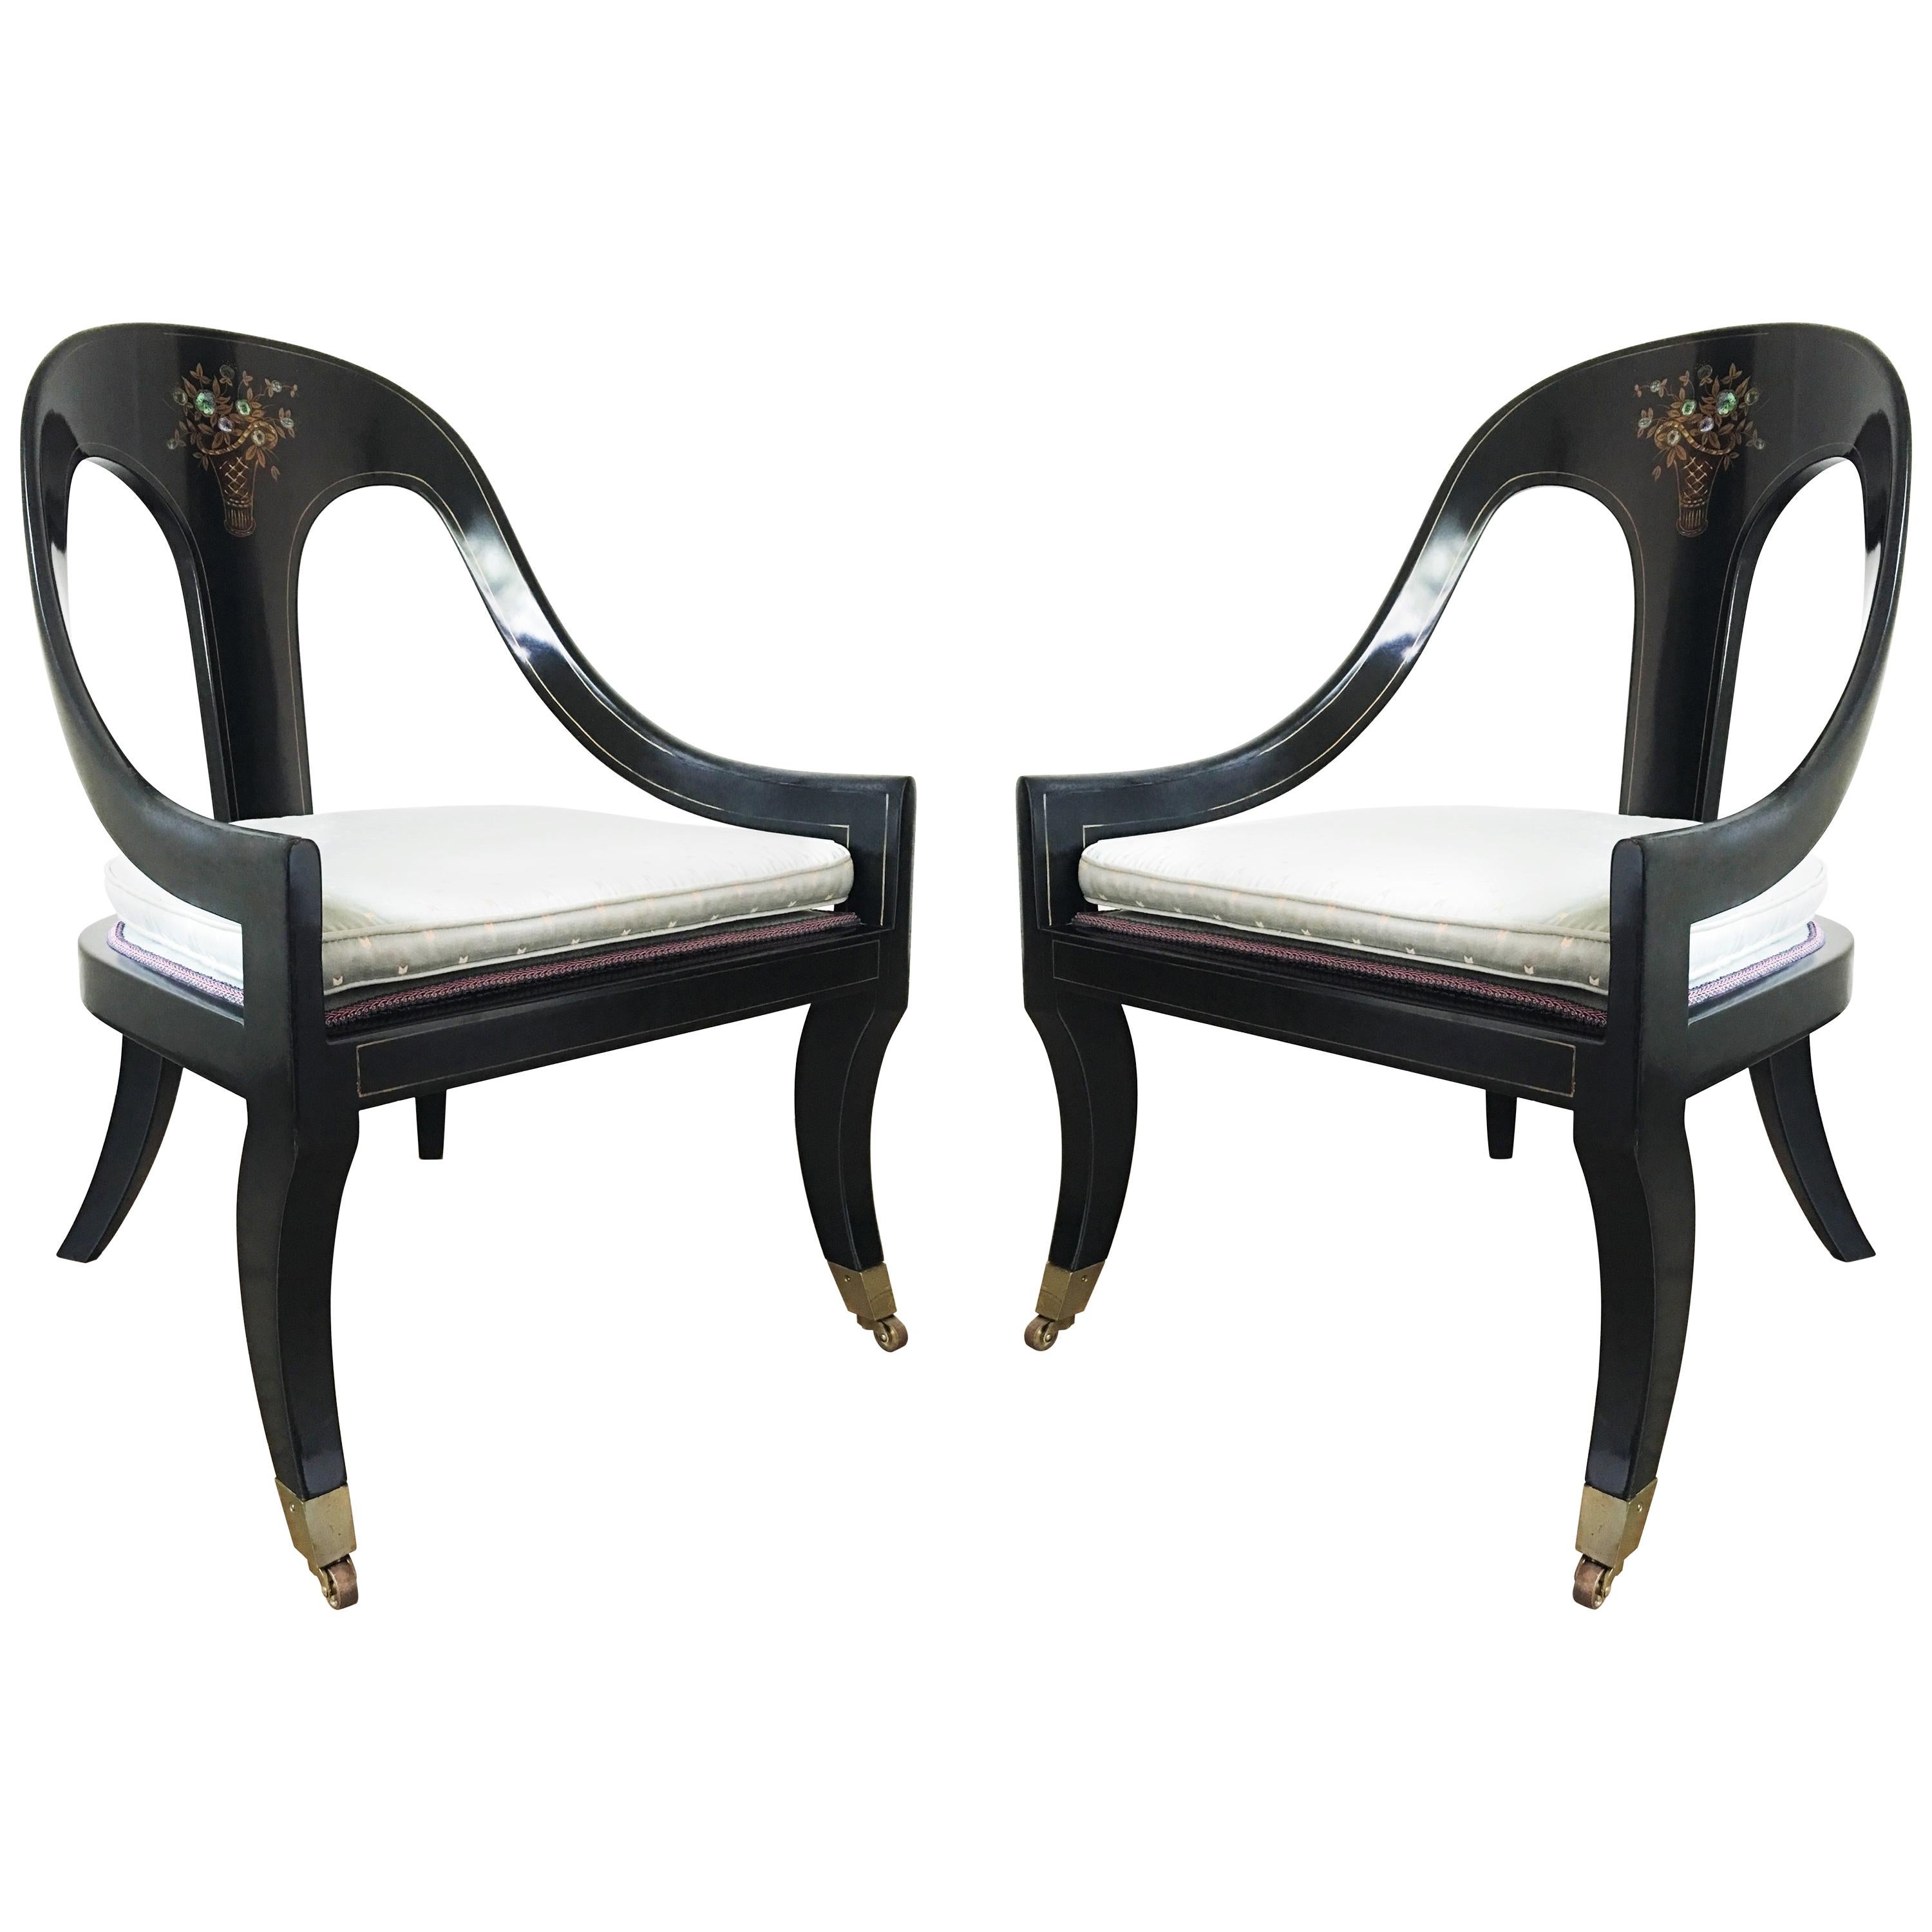 Pair of Lacquered and Mother of Pearl Inlaid Spoon Back Chairs For Sale